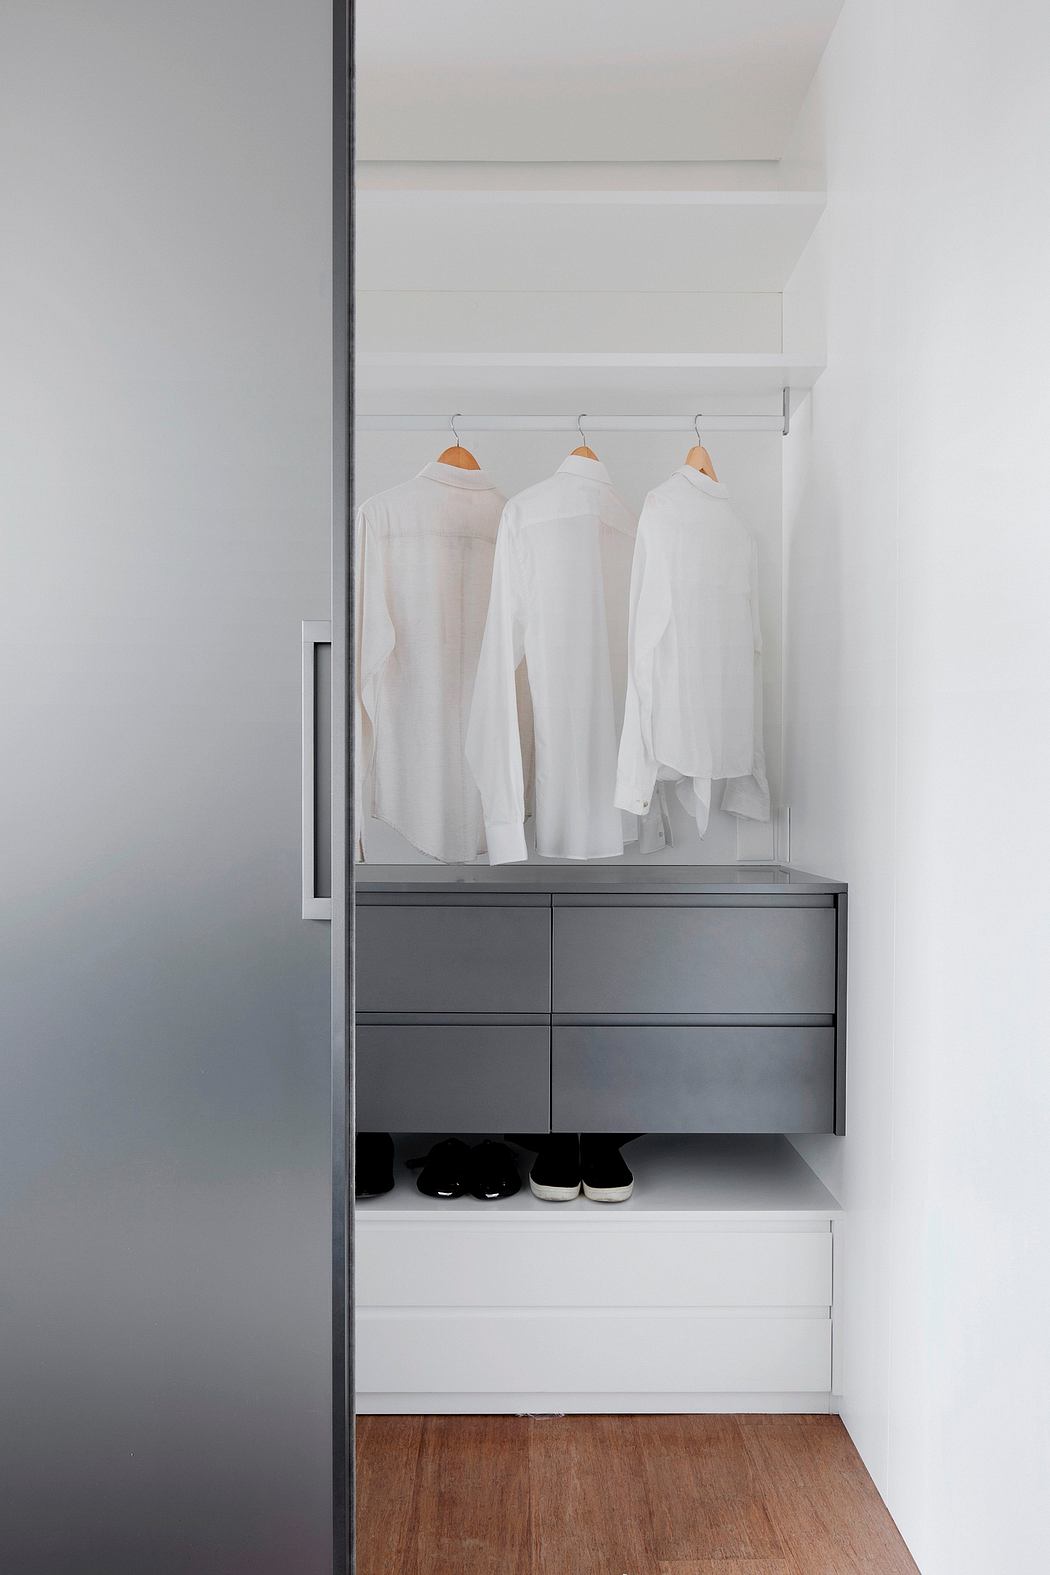 Clean, minimalist closet with wood floor, white shirts, and drawers in a neutral gray color.